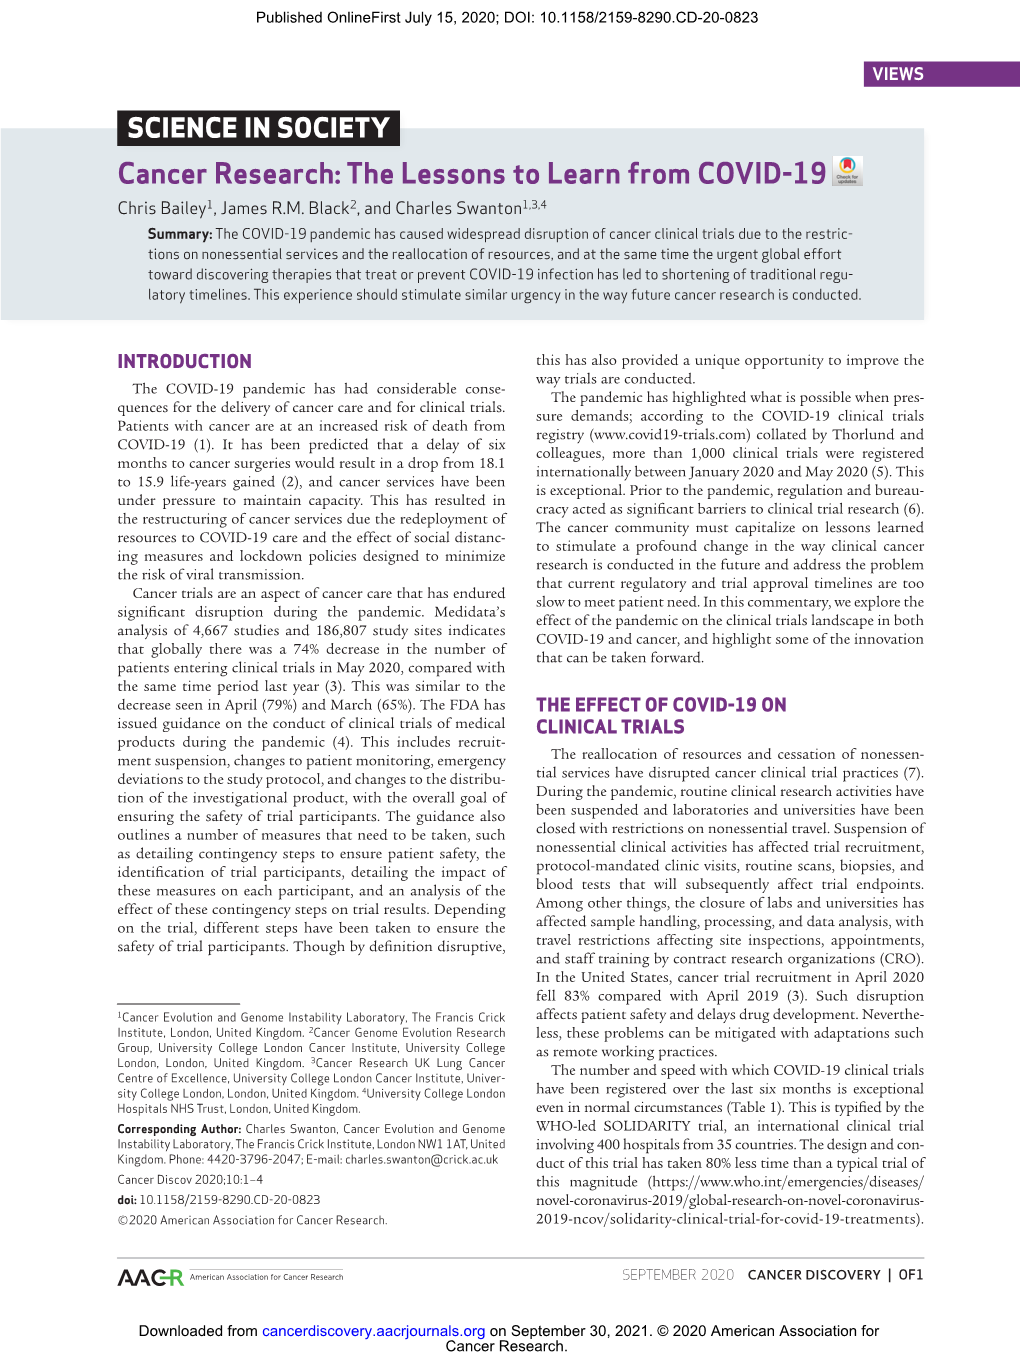 Cancer Research: the Lessons to Learn from COVID-19 Chris Bailey1, James R.M